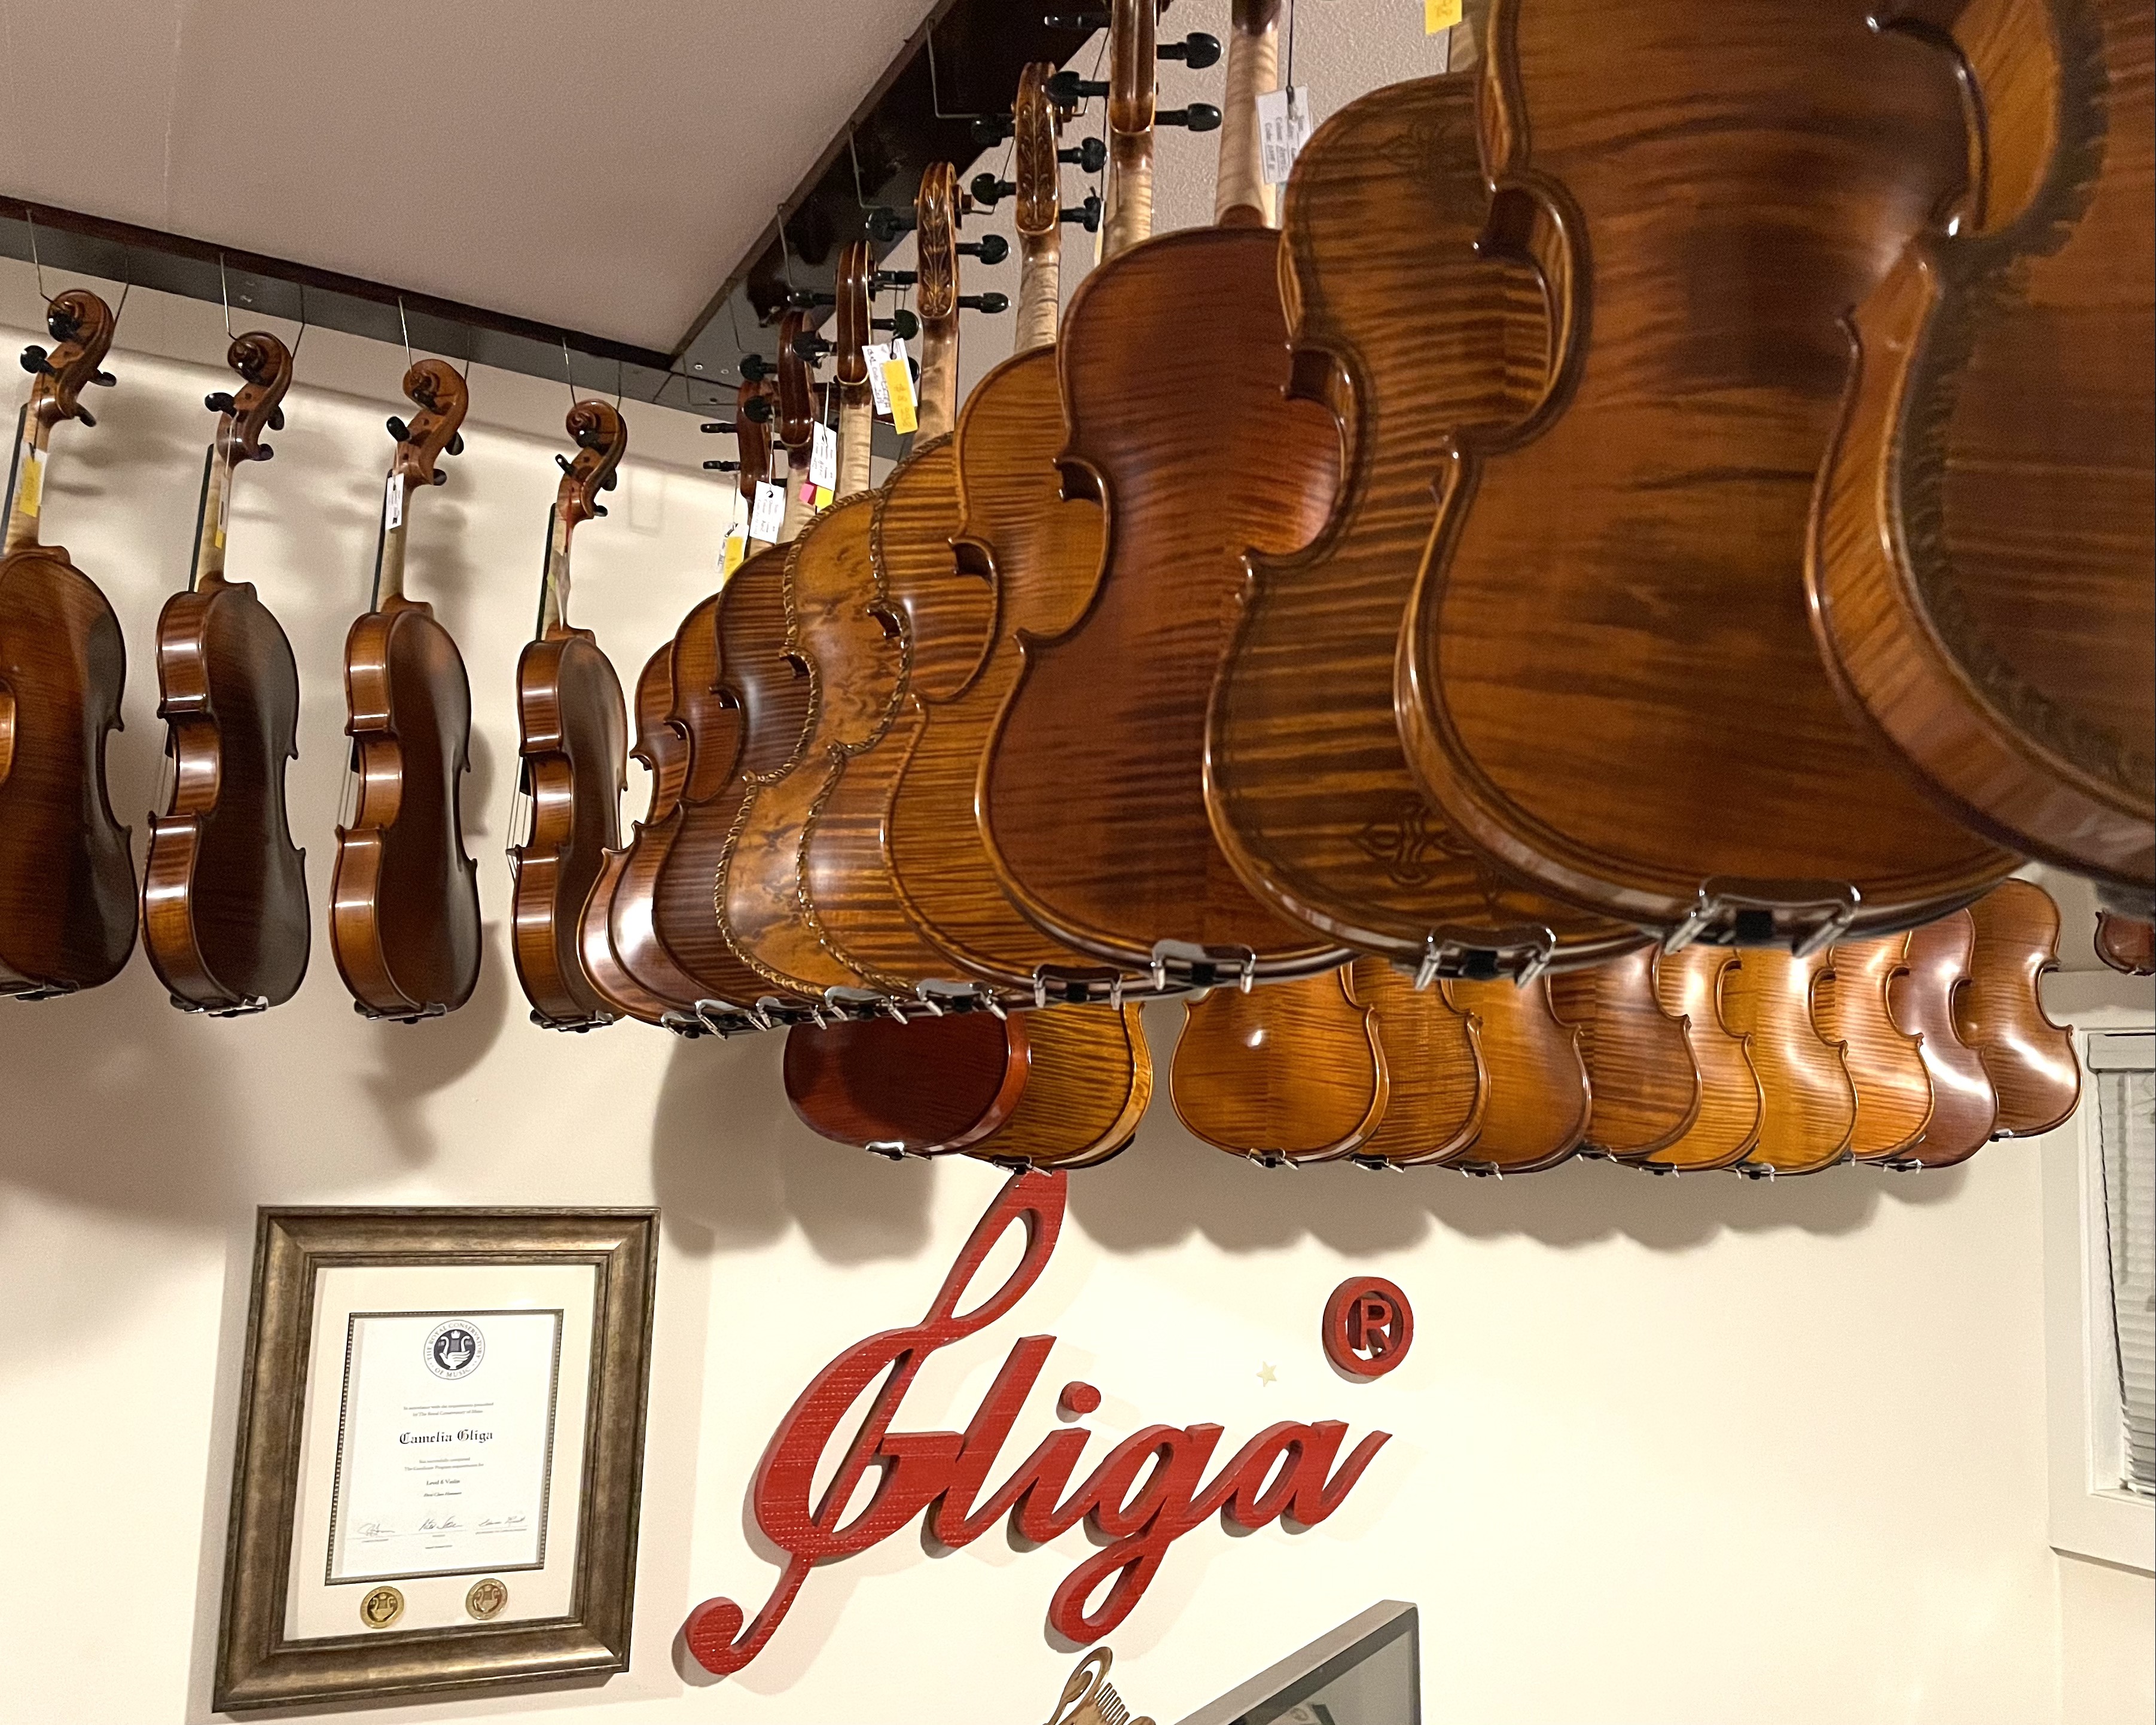 Advanced Violins for Sale Handcrafted in Romania - European Orchestra Performance Violins